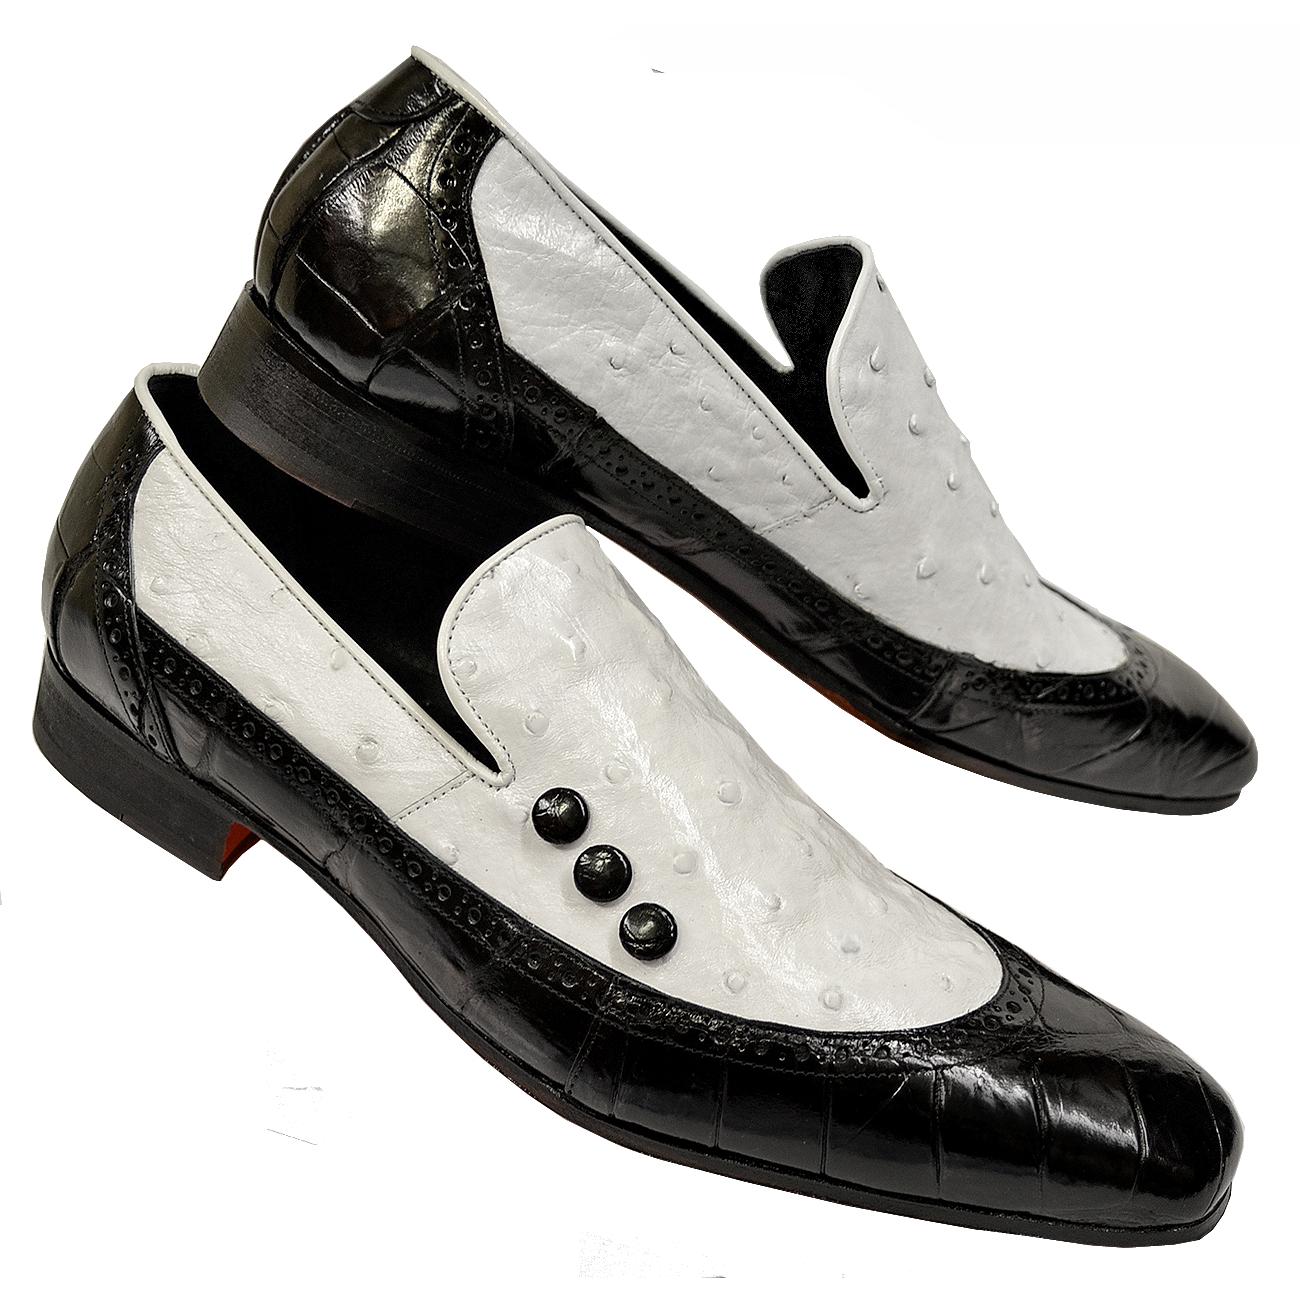 Ostrich Spat-Style Loafer Shoes 